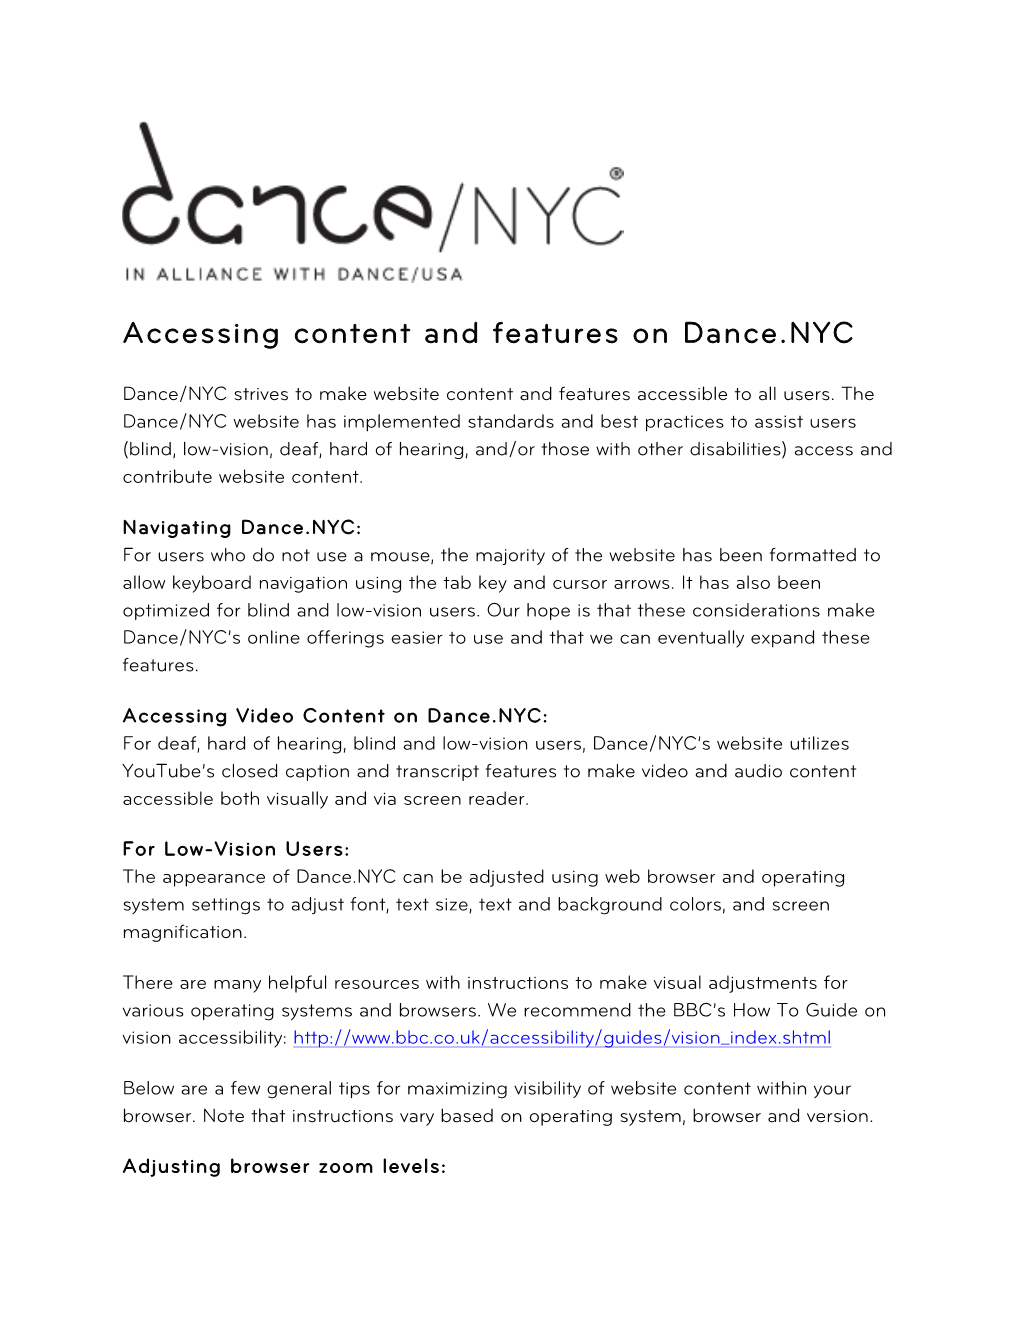 Accessing Content and Features on Dance.NYC